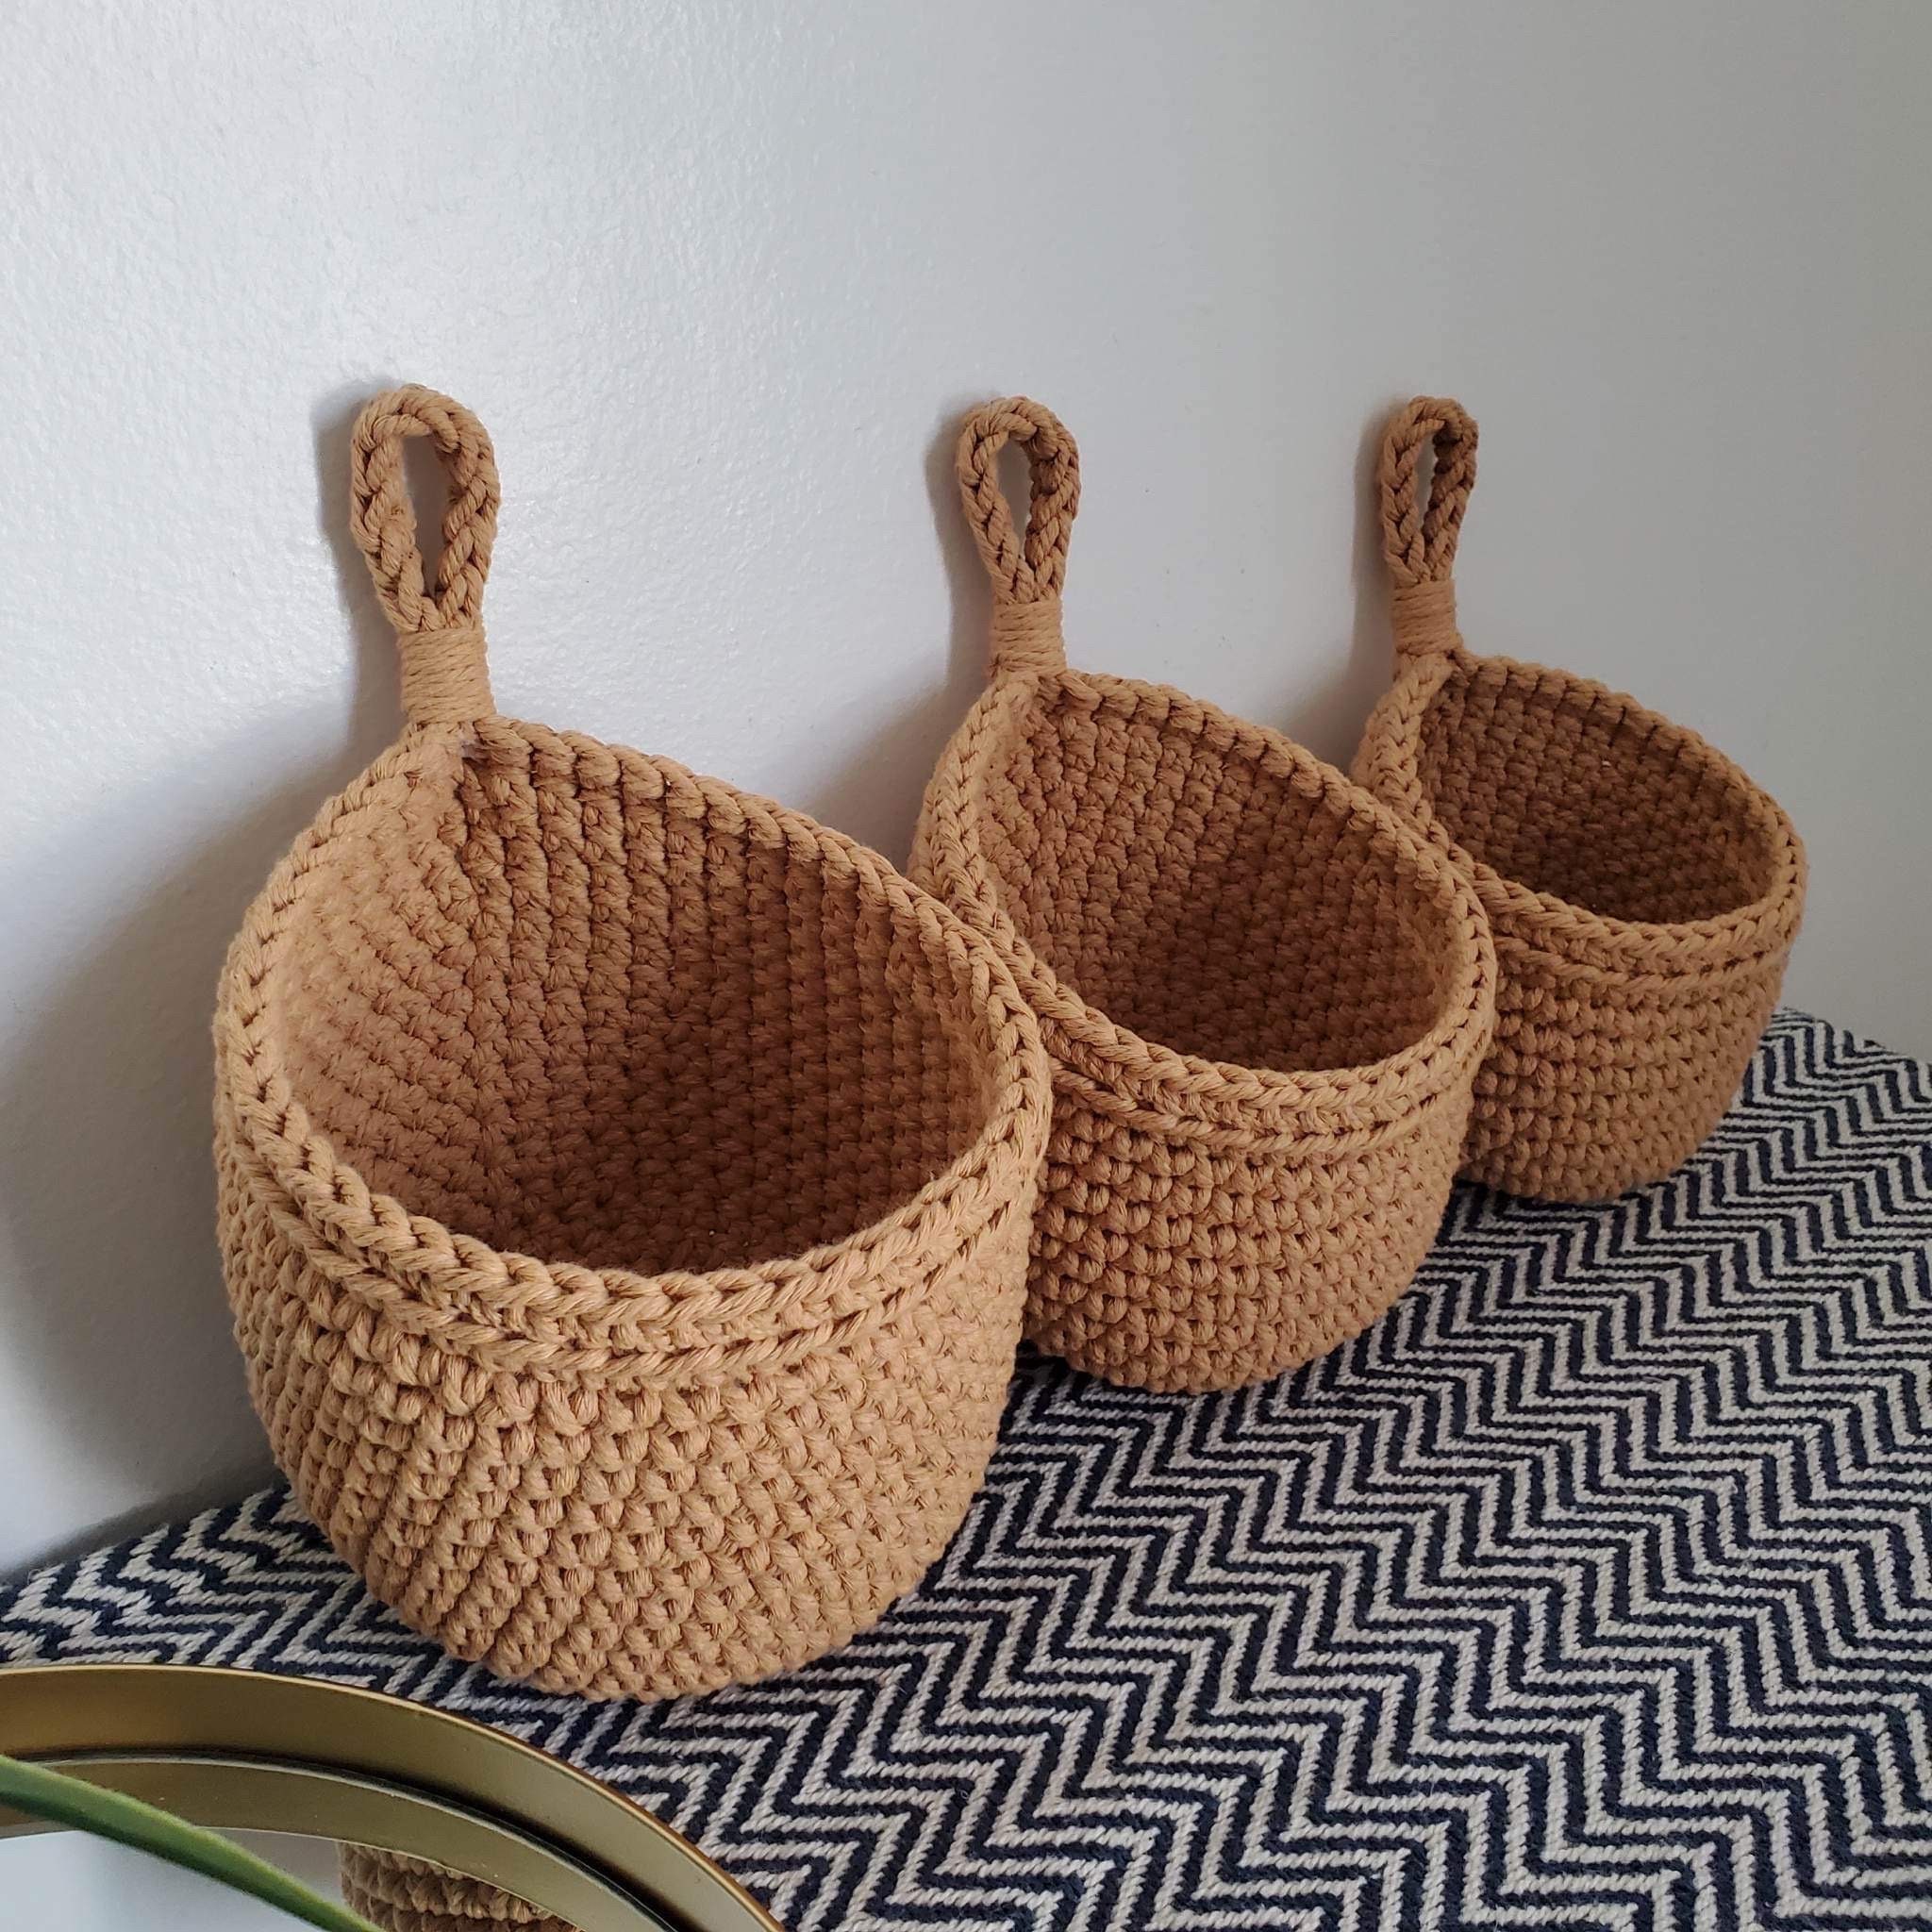 Copper and Jute Rope 3 Tier Hanging Basket by World Market